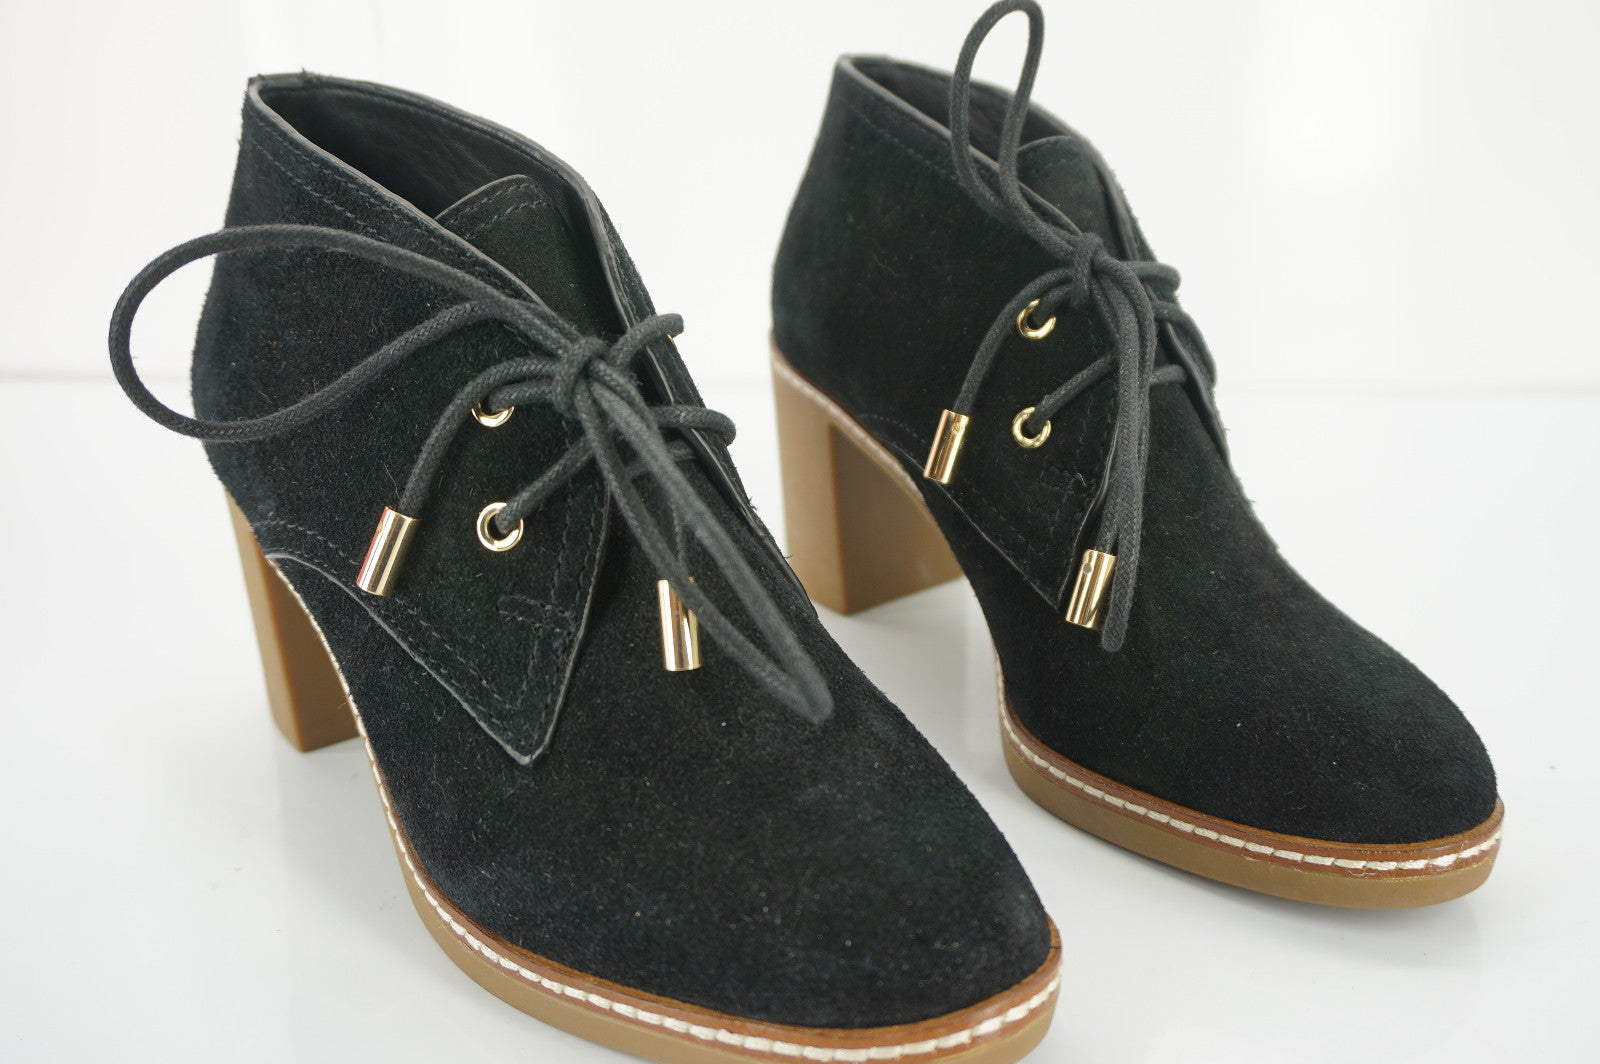 Tory Burch Black Suede 'Hilary' Desert Ankle Boots size 5.5 NIB l $375